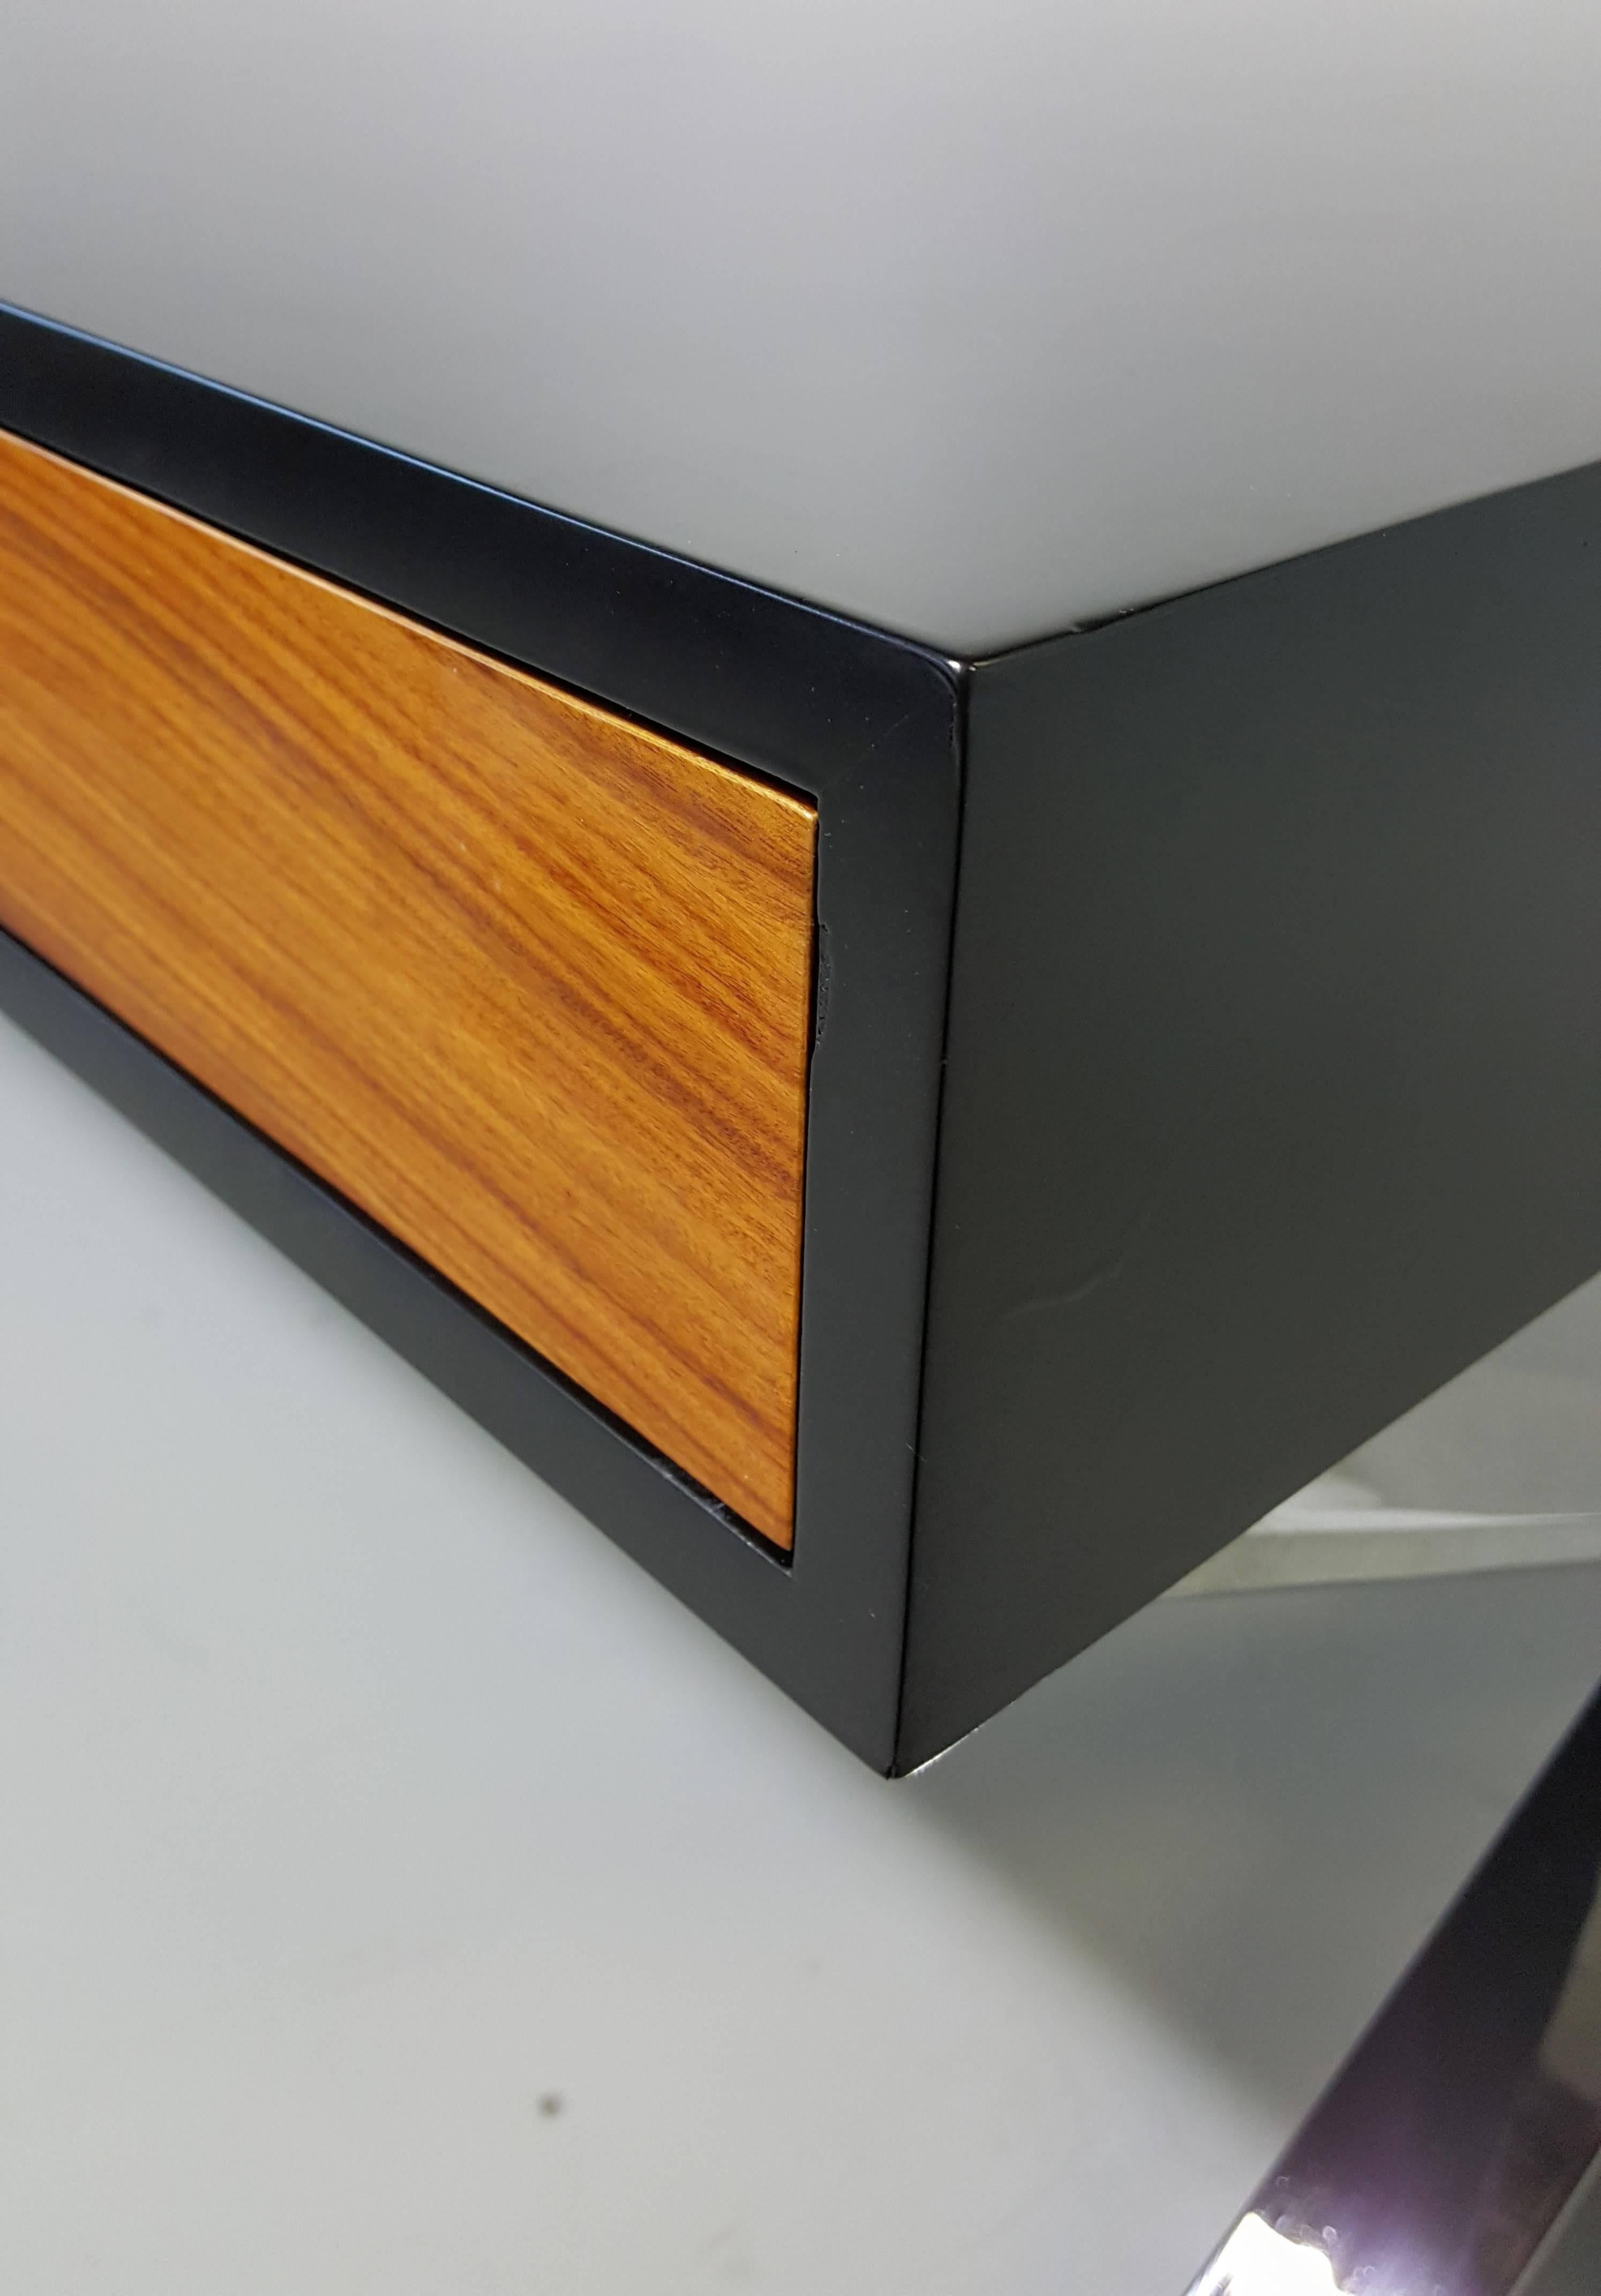 American Massive Milo Baughman Executive Desk with Rosewood and Chrome Detail, 1970s